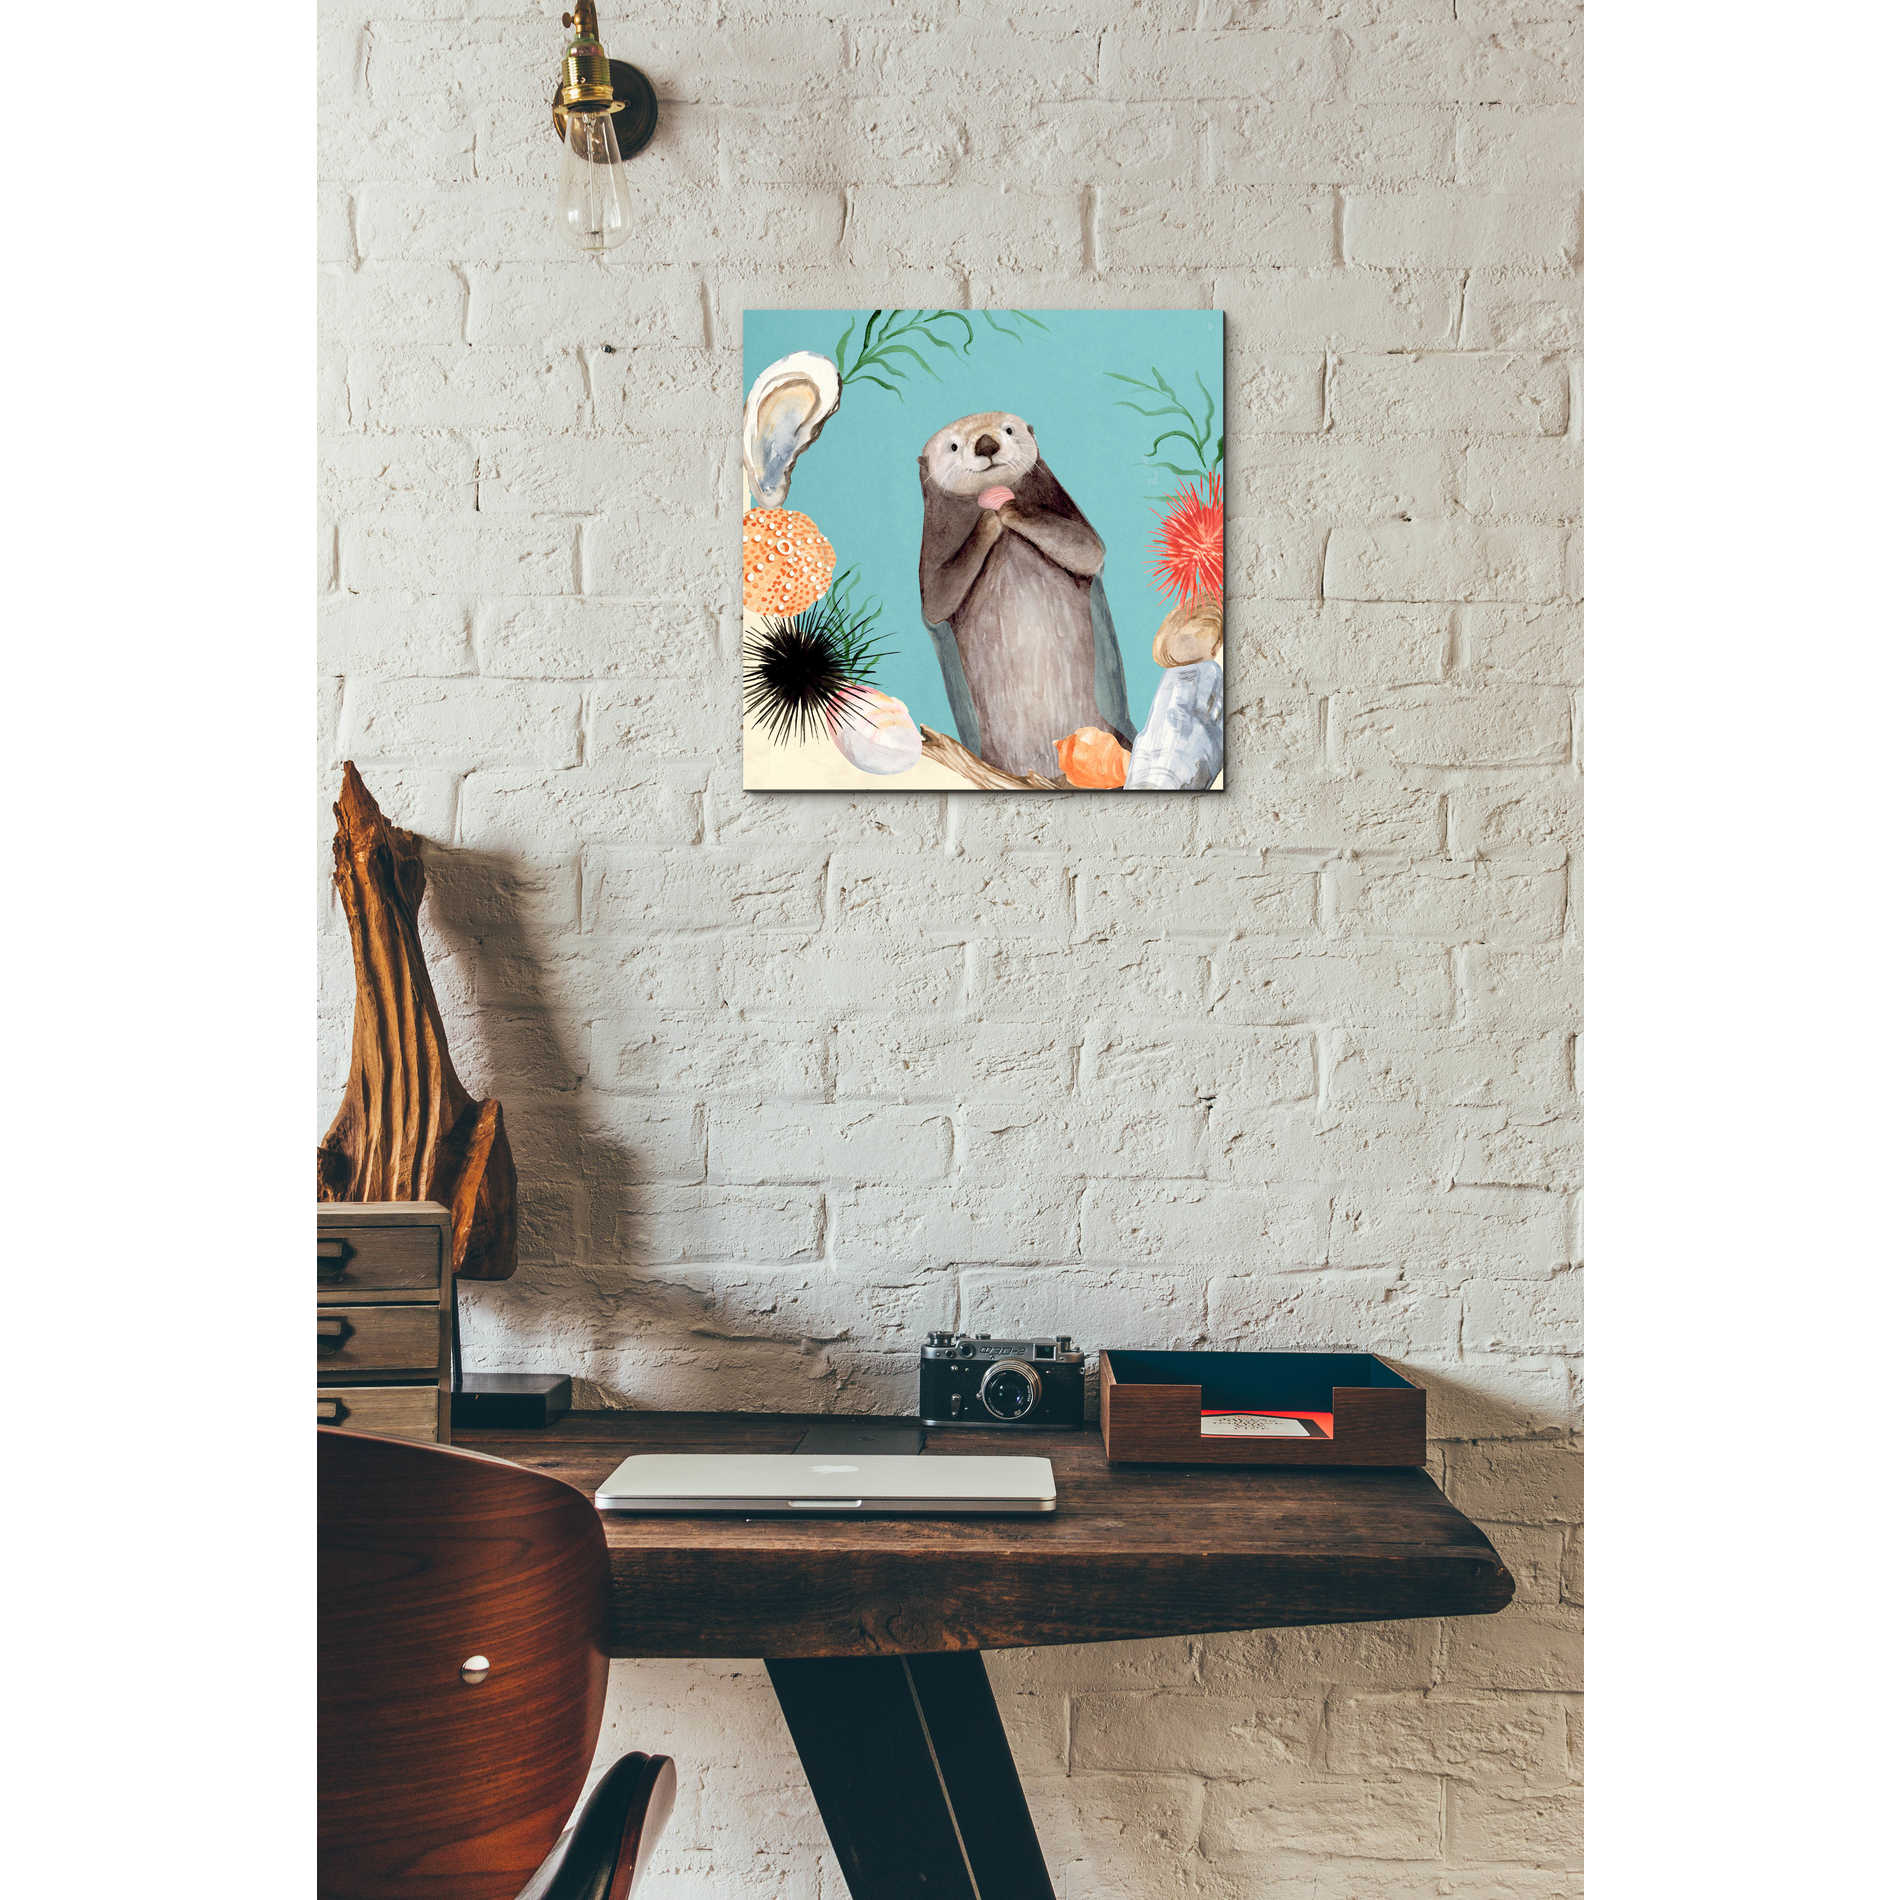 Epic Art 'Otter's Paradise II' by Victoria Borges, Acrylic Glass Wall Art,12x12